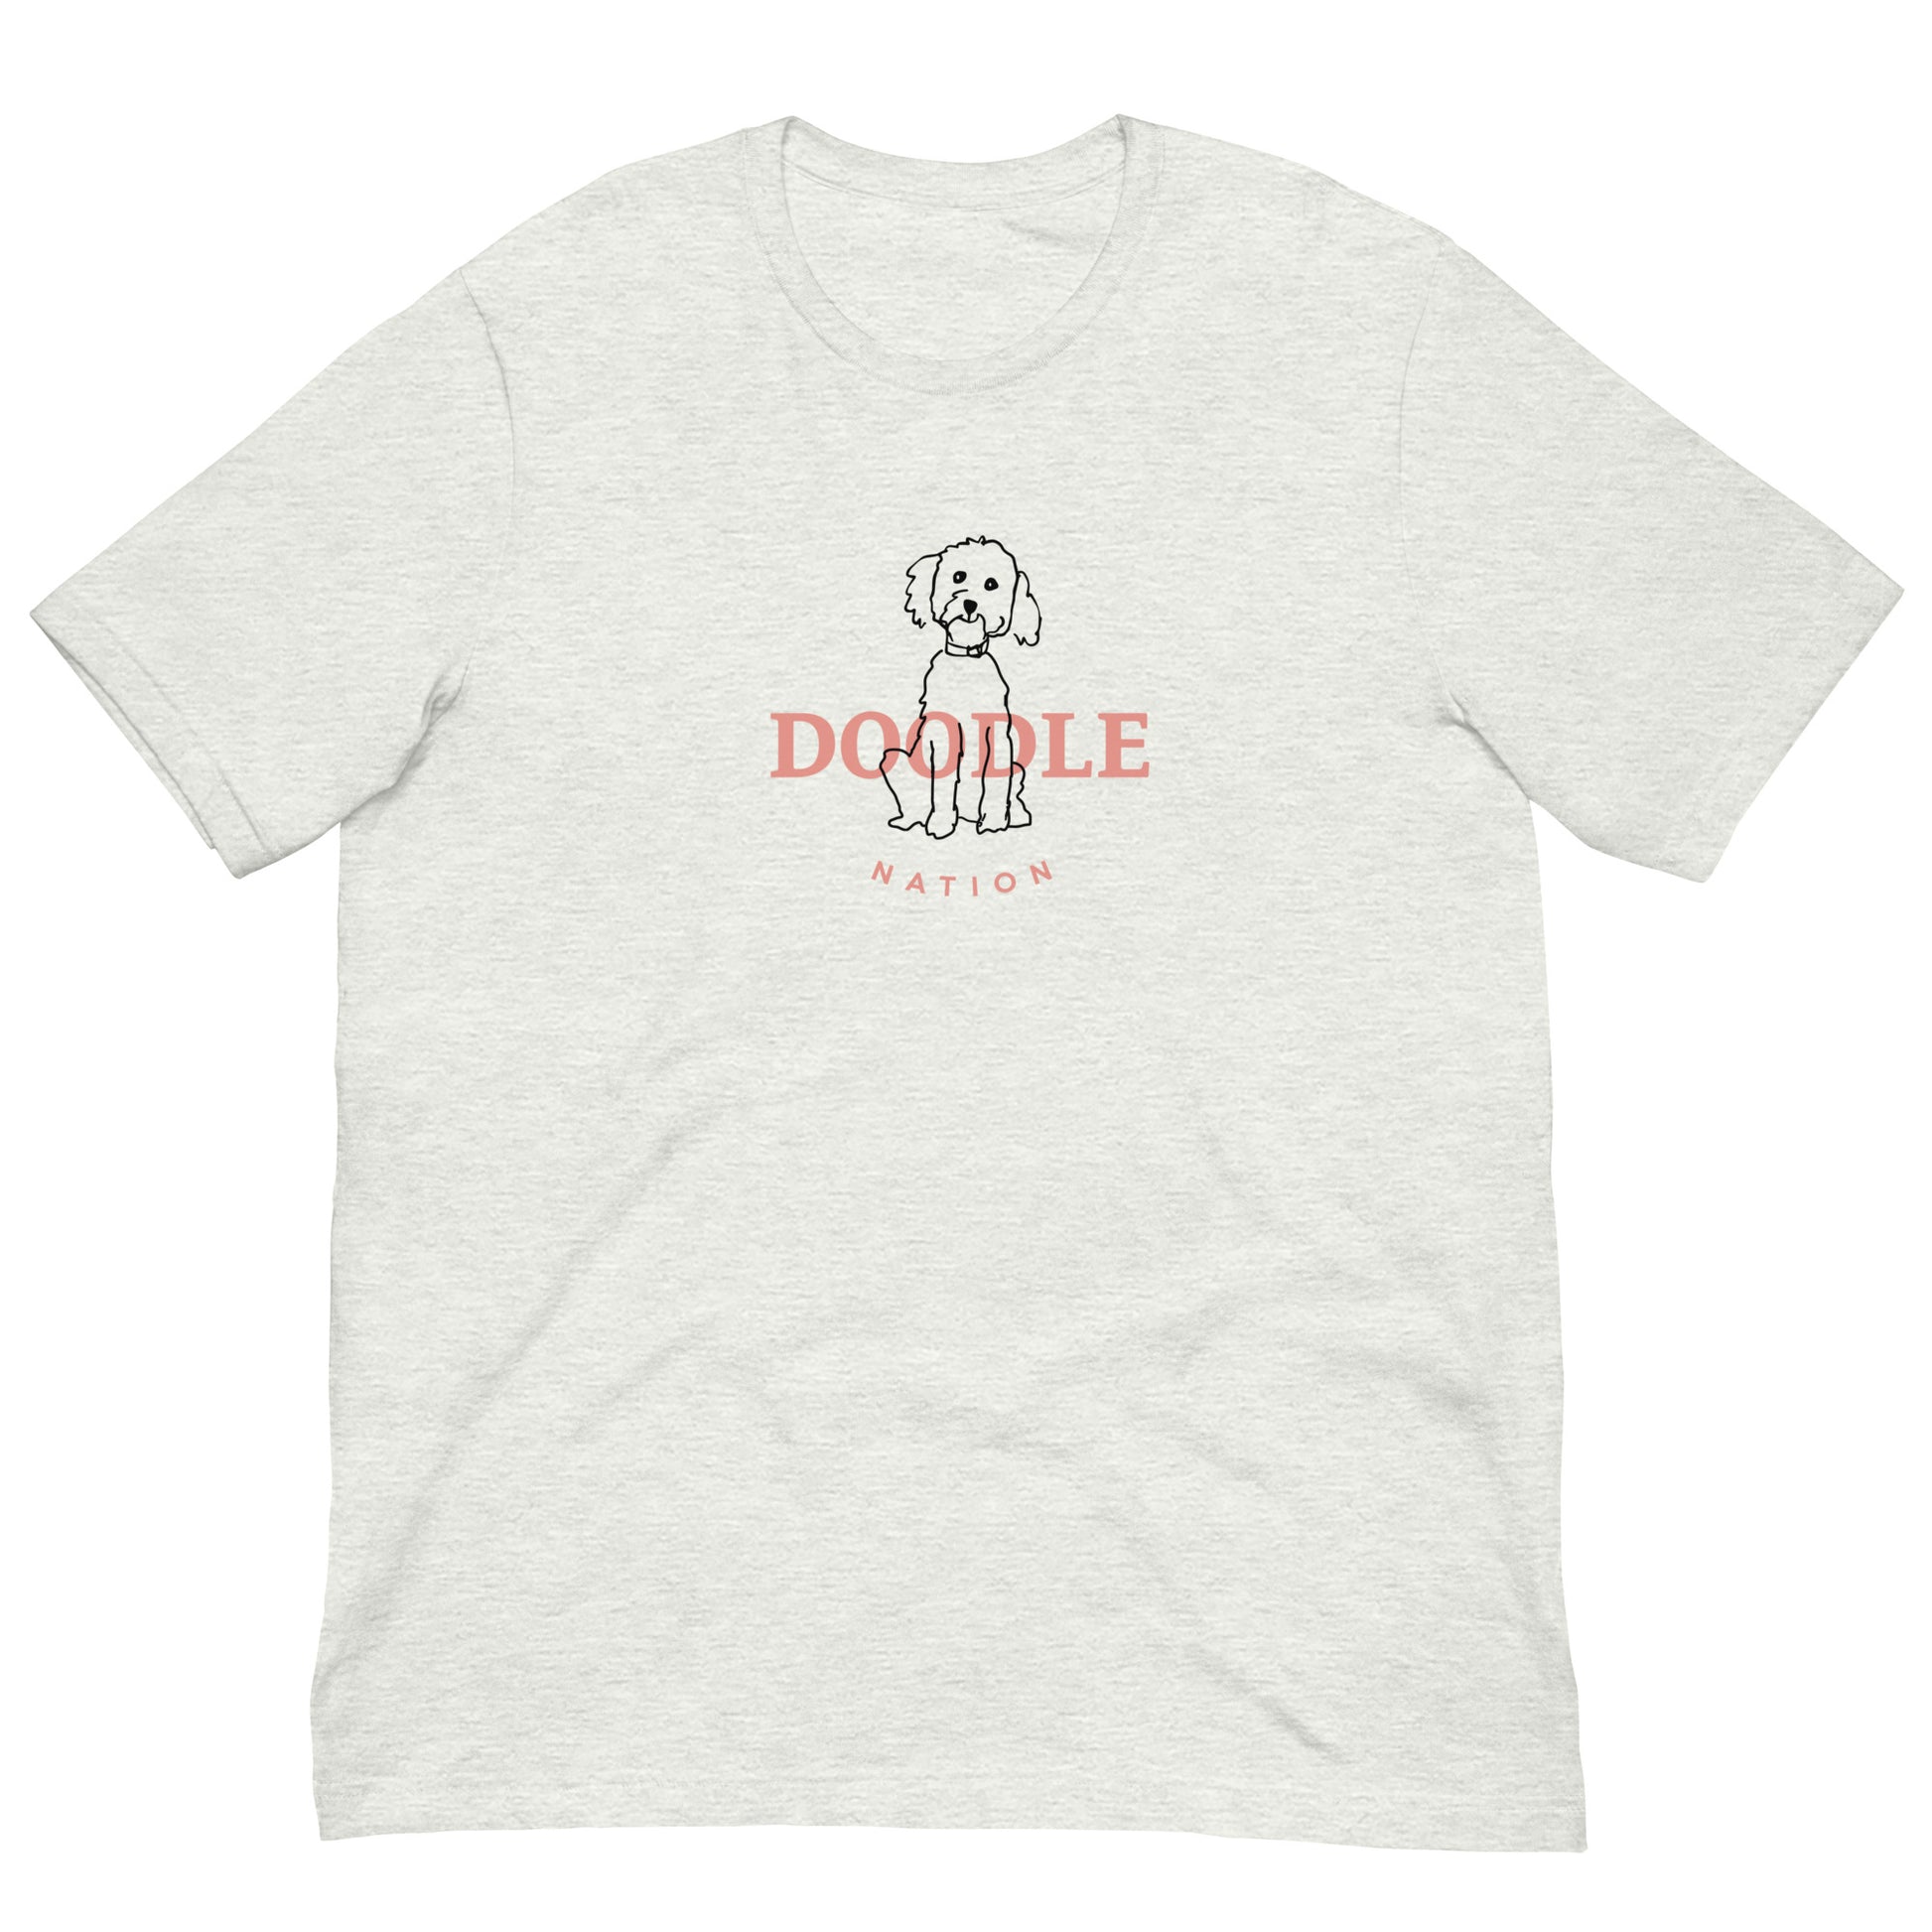 Goldendoodle t-shirt with Goldendoodle and words "Doodle Nation" in ash color